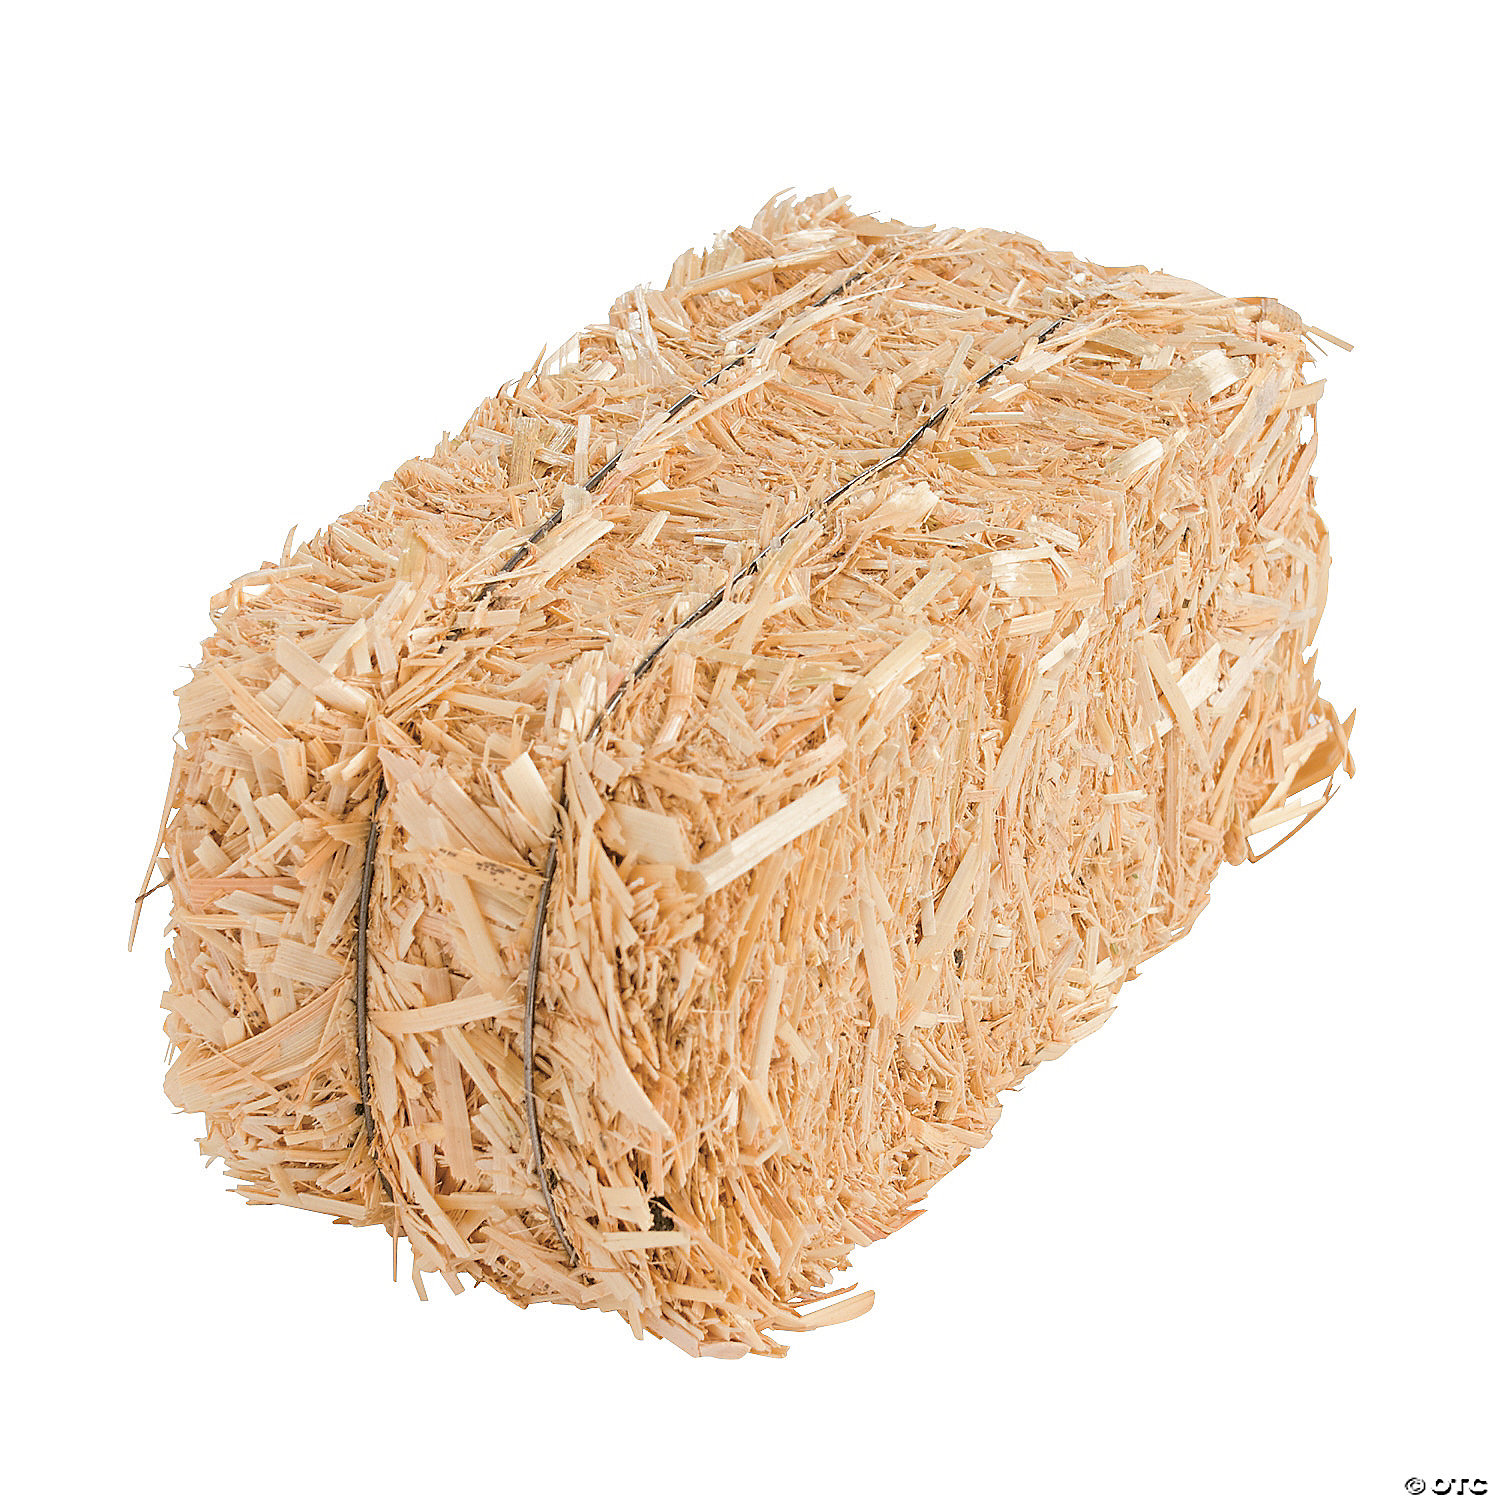 Small Hay Bale Oriental Trading